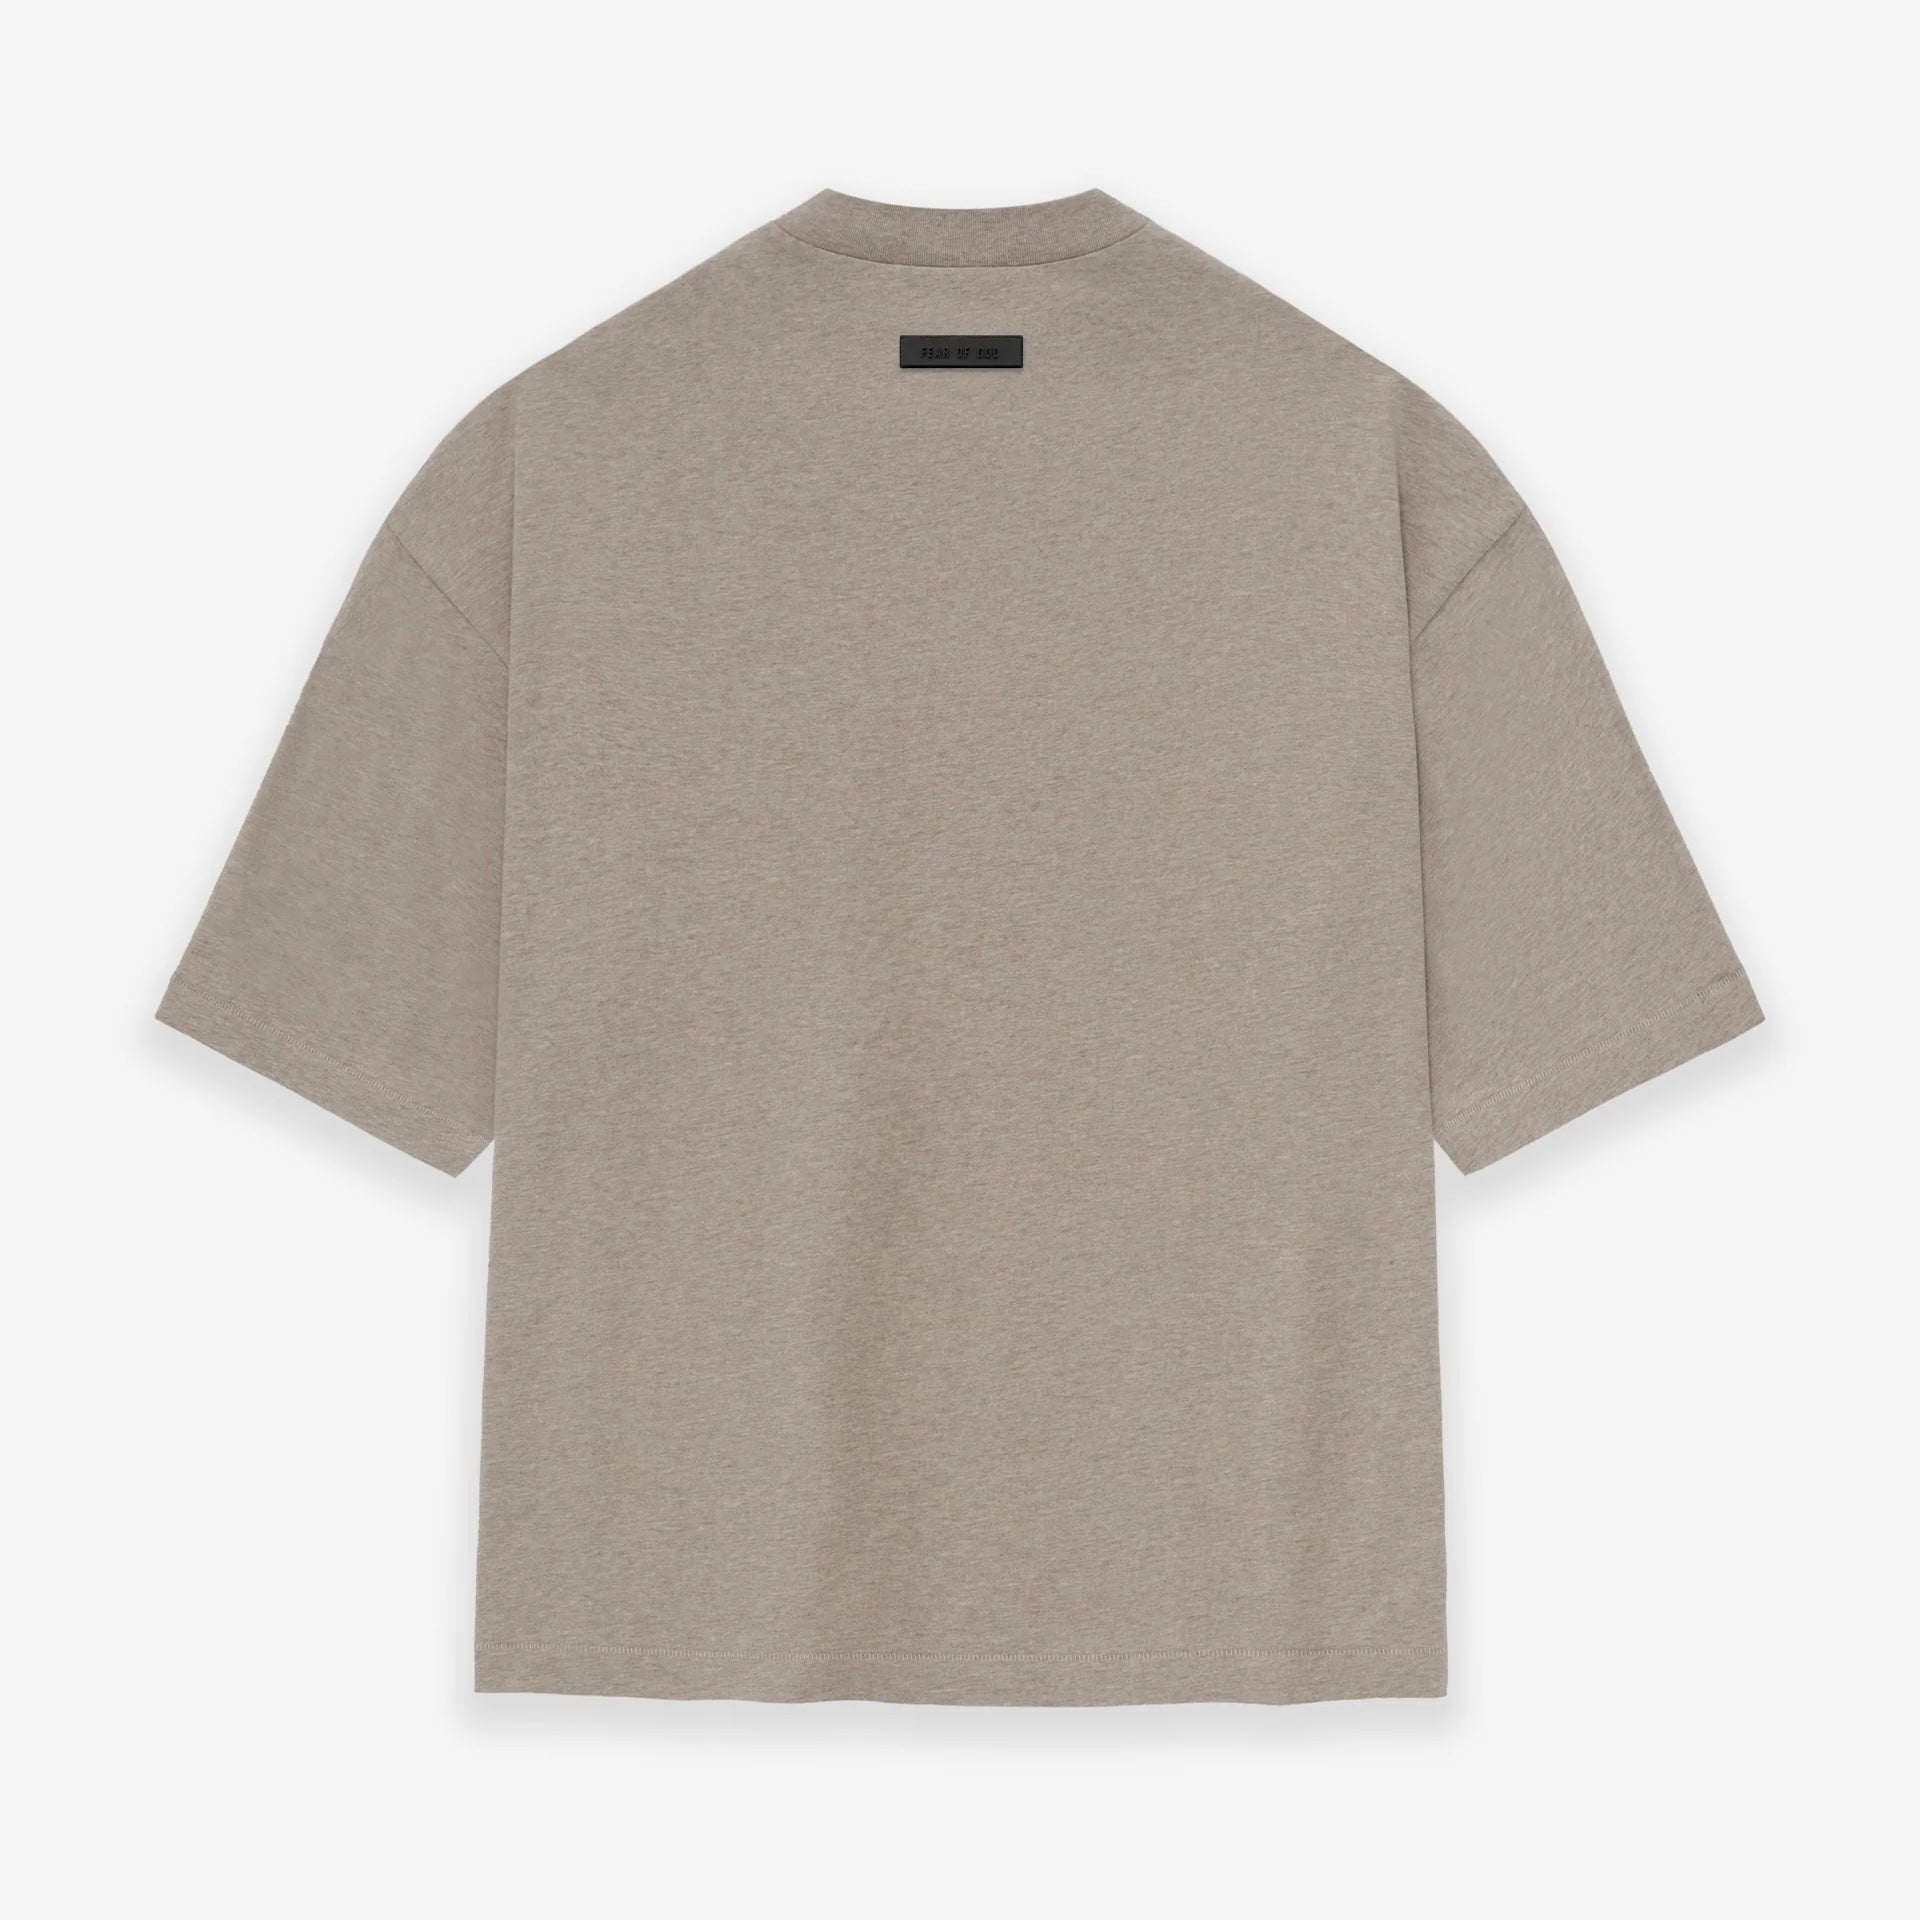 Fear of God Essentials Core Heather T-Shirt Back VIew